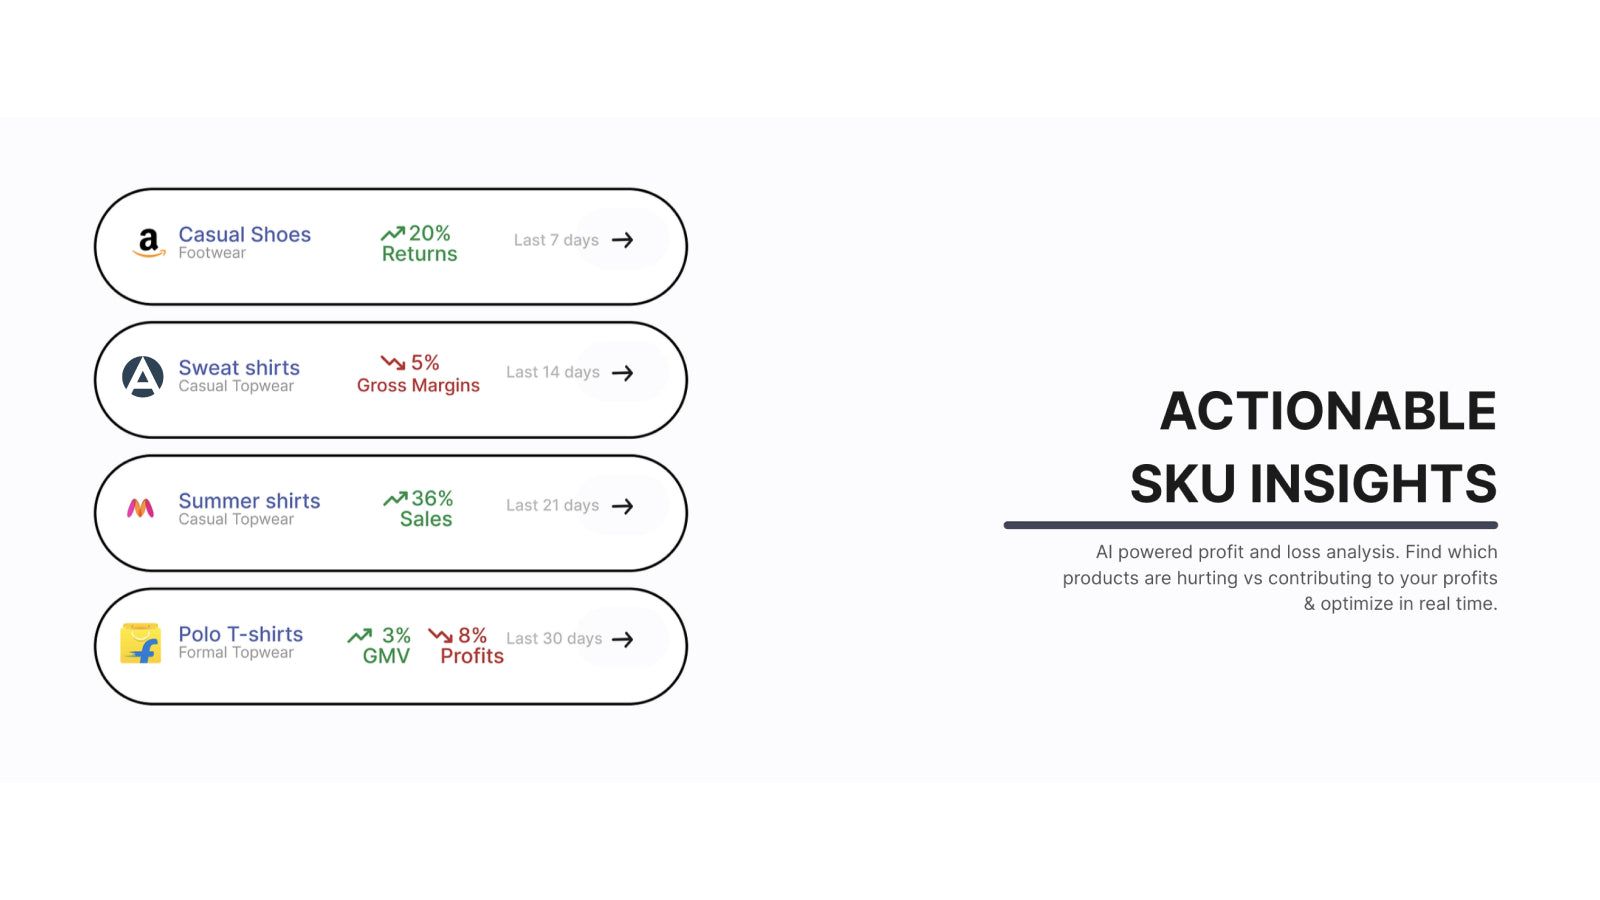 Actionable insights to improve your business for every SKU